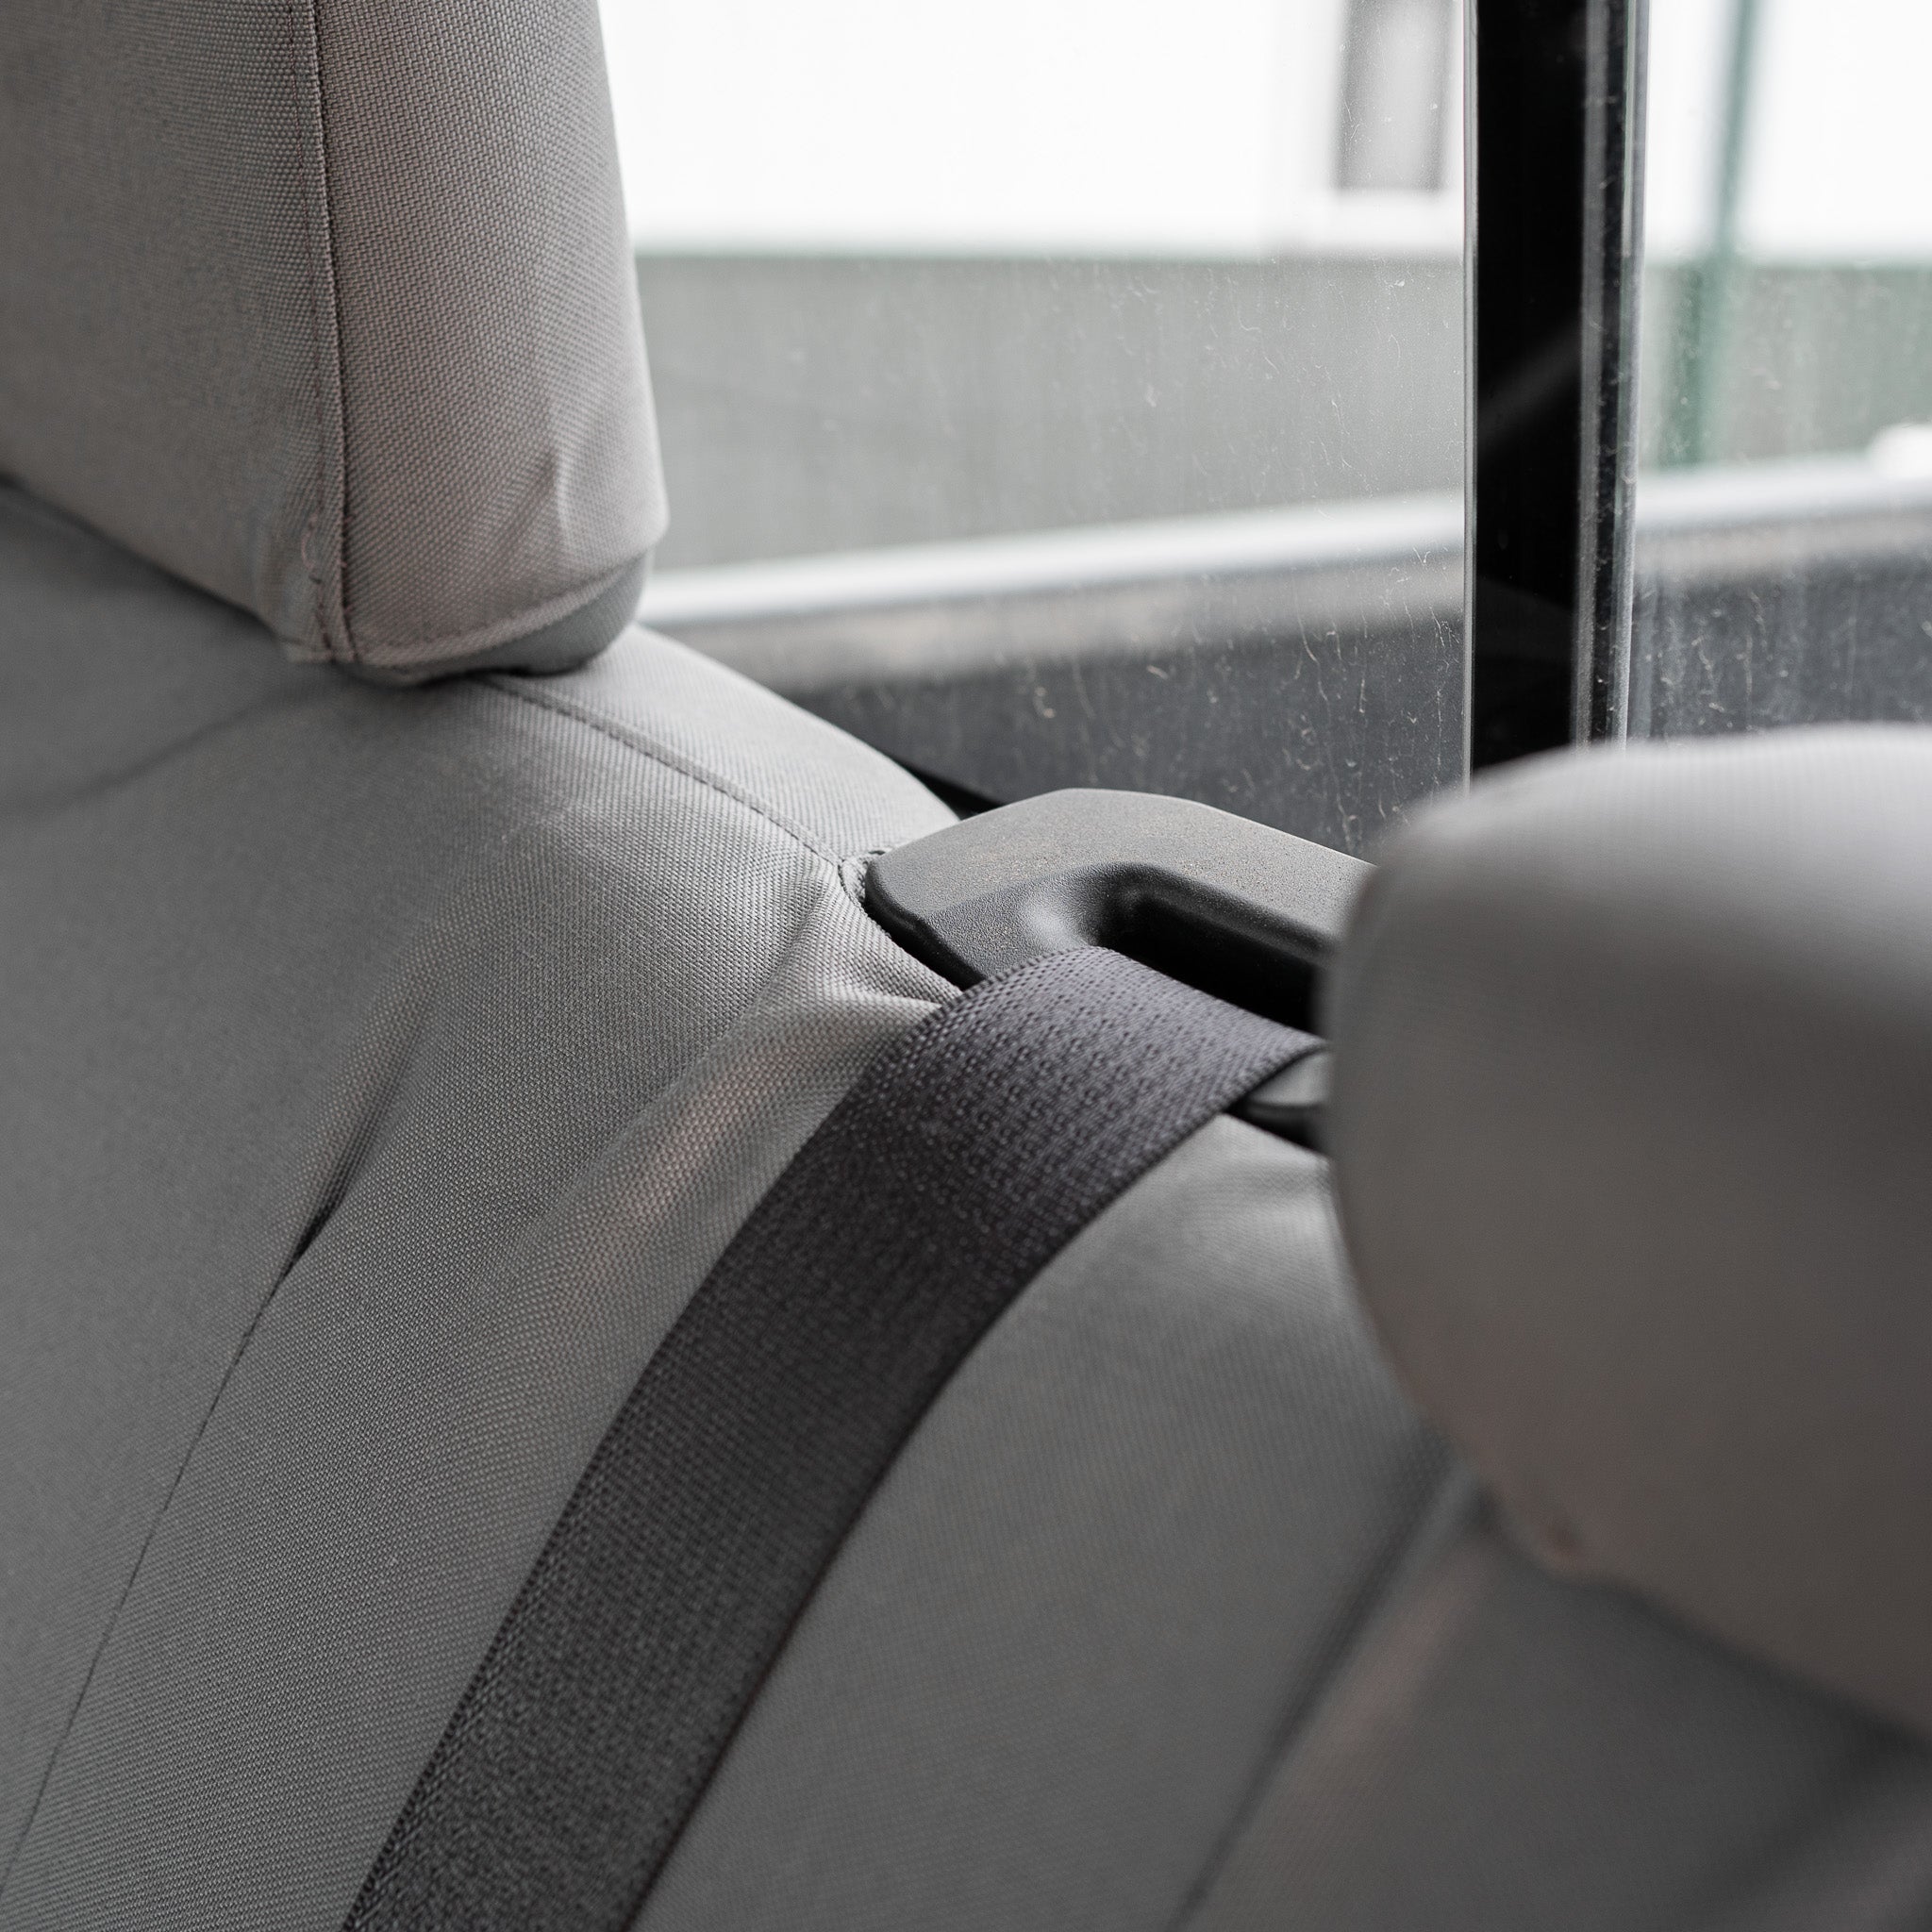 Detail photo showing how the TigerTough seat cover works around the seat belt retractor on the back seat of a RAM truck.